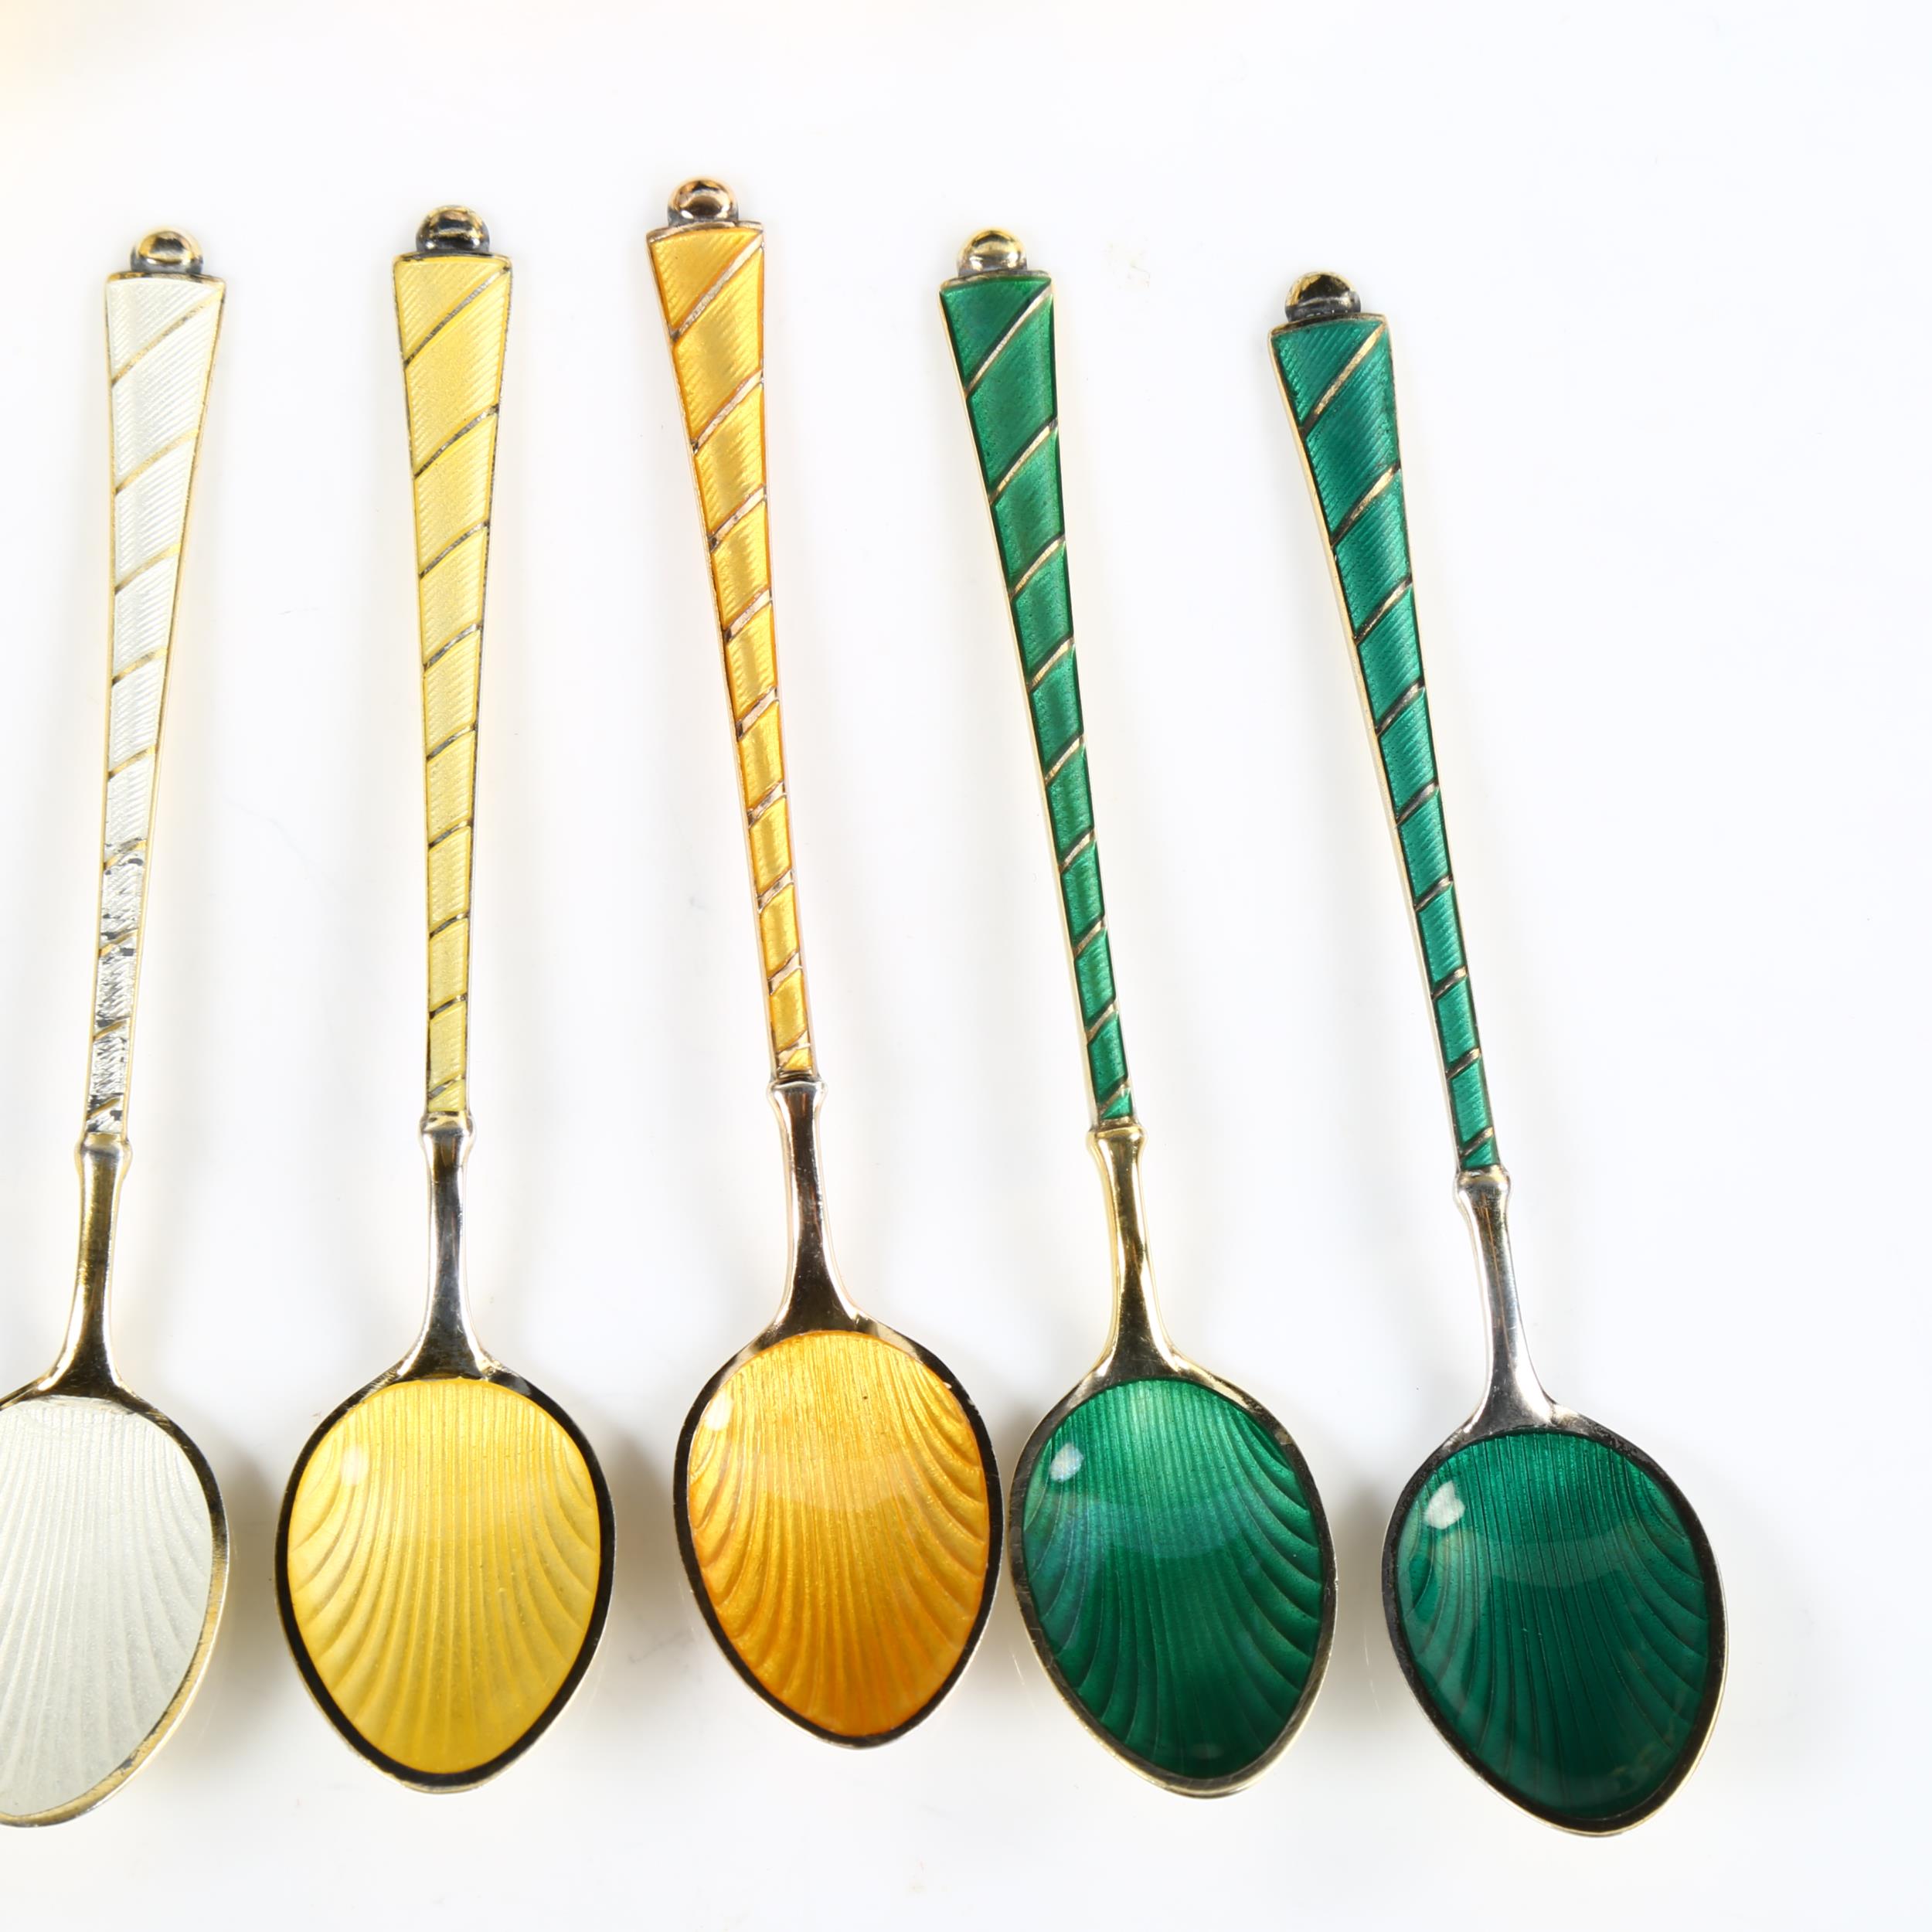 EGON LAURIDSEN - a set of 12 Danish vermeil sterling silver and harlequin enamel coffee spoons and a - Image 2 of 3